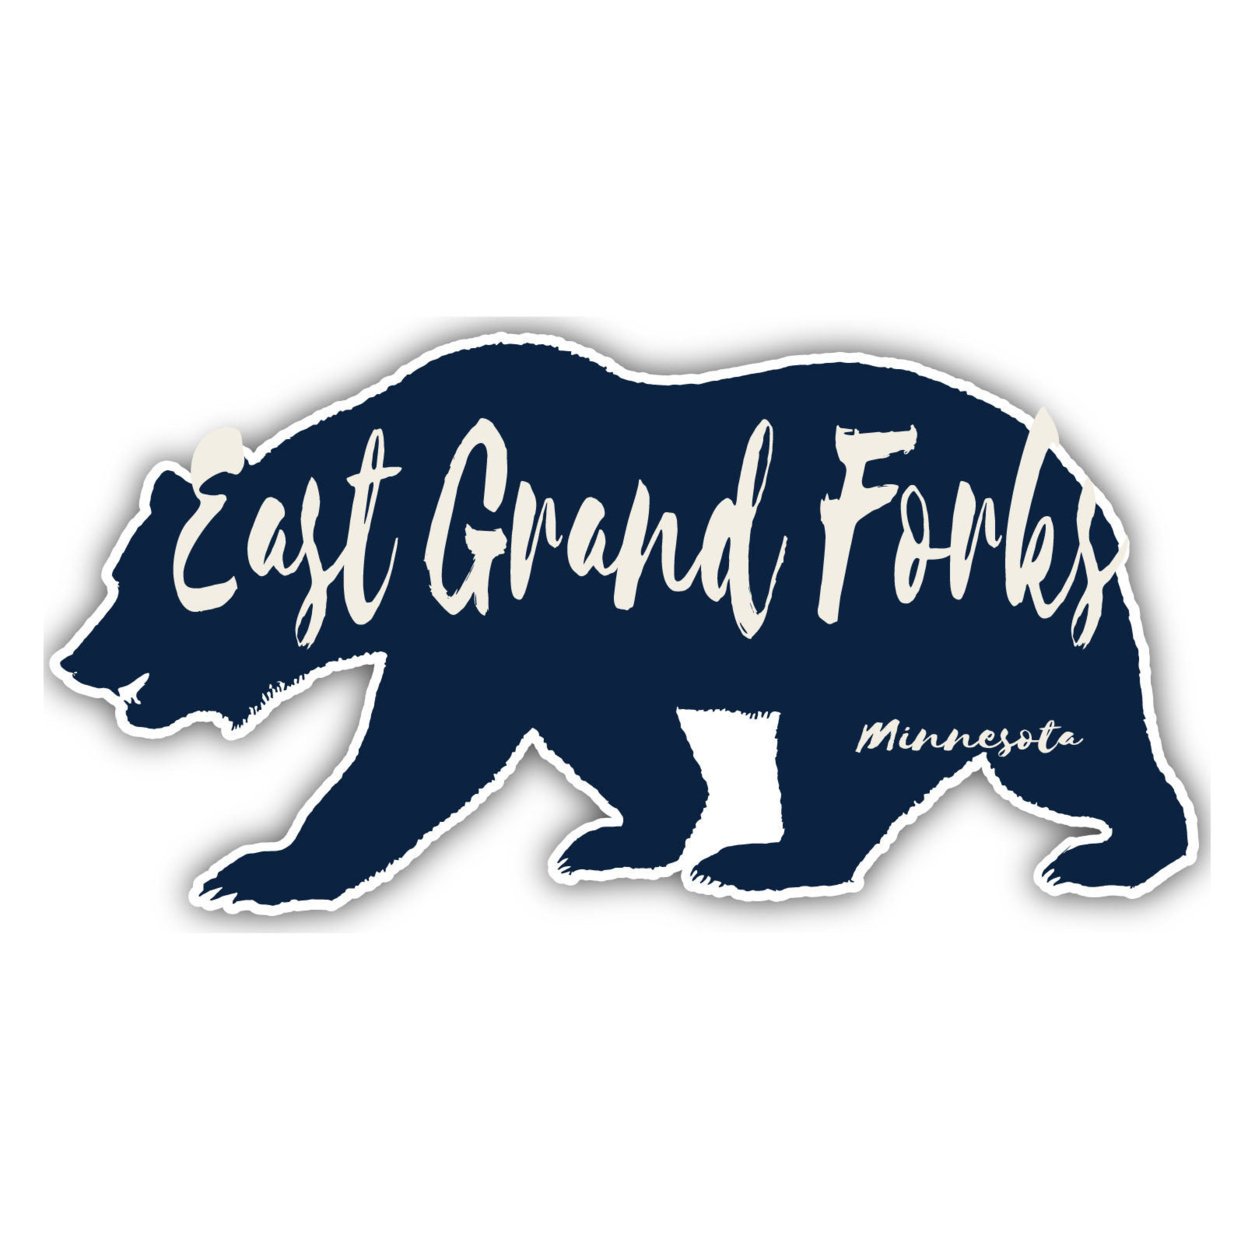 East Grand Forks Minnesota Souvenir Decorative Stickers (Choose Theme And Size) - 4-Pack, 8-Inch, Bear